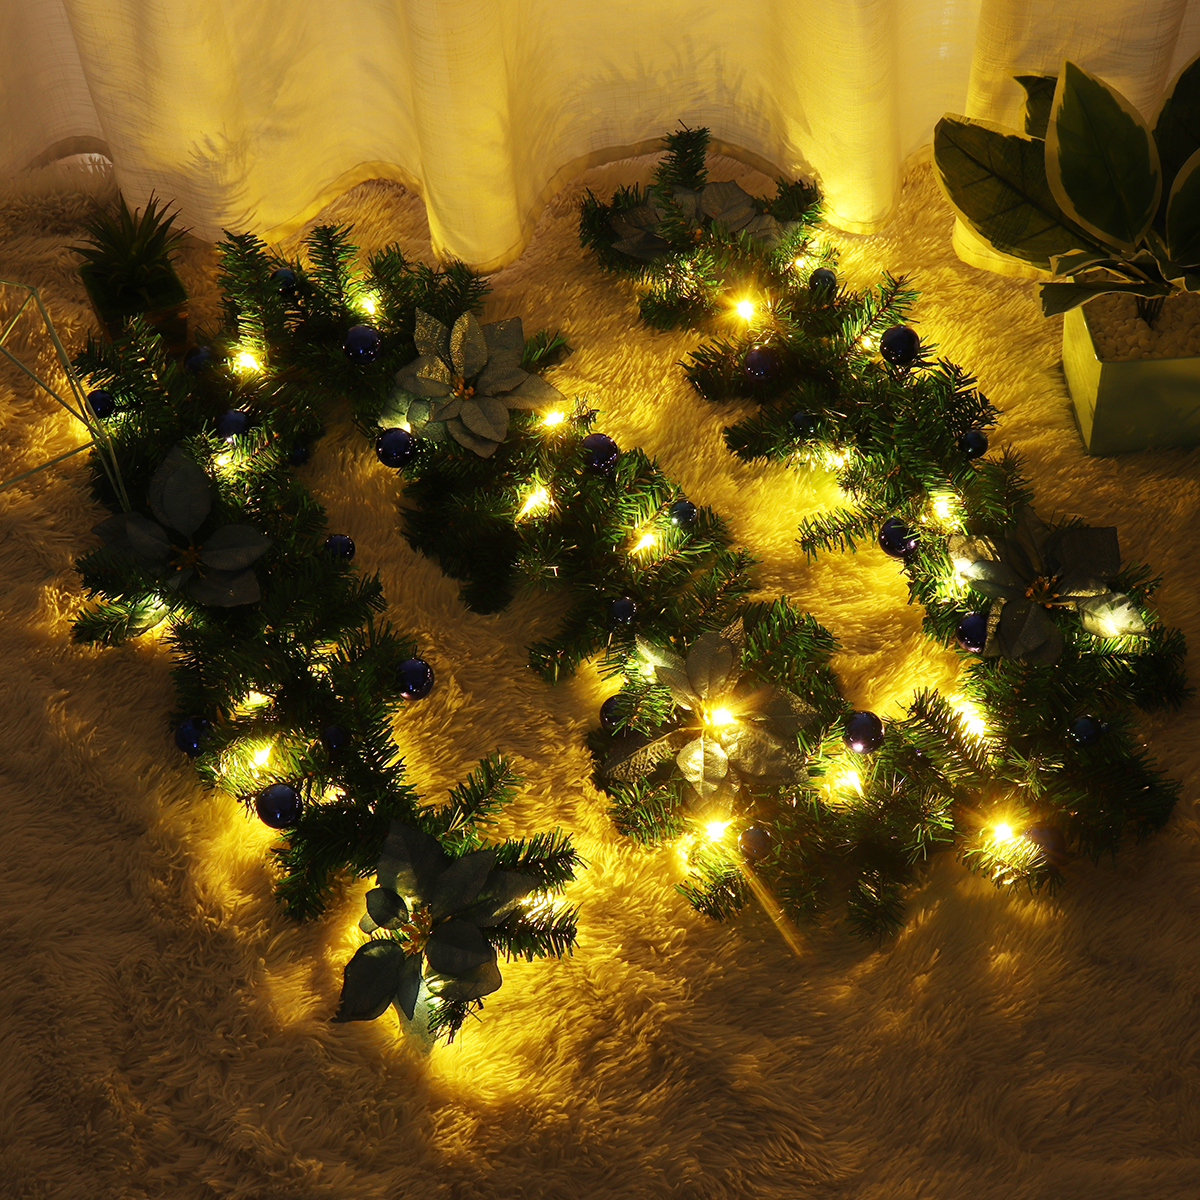 27m-Christmas-Garland-Colorful-Fireplaces-Stairs-LED-Decorated-Garlands-Decor-1821550-8